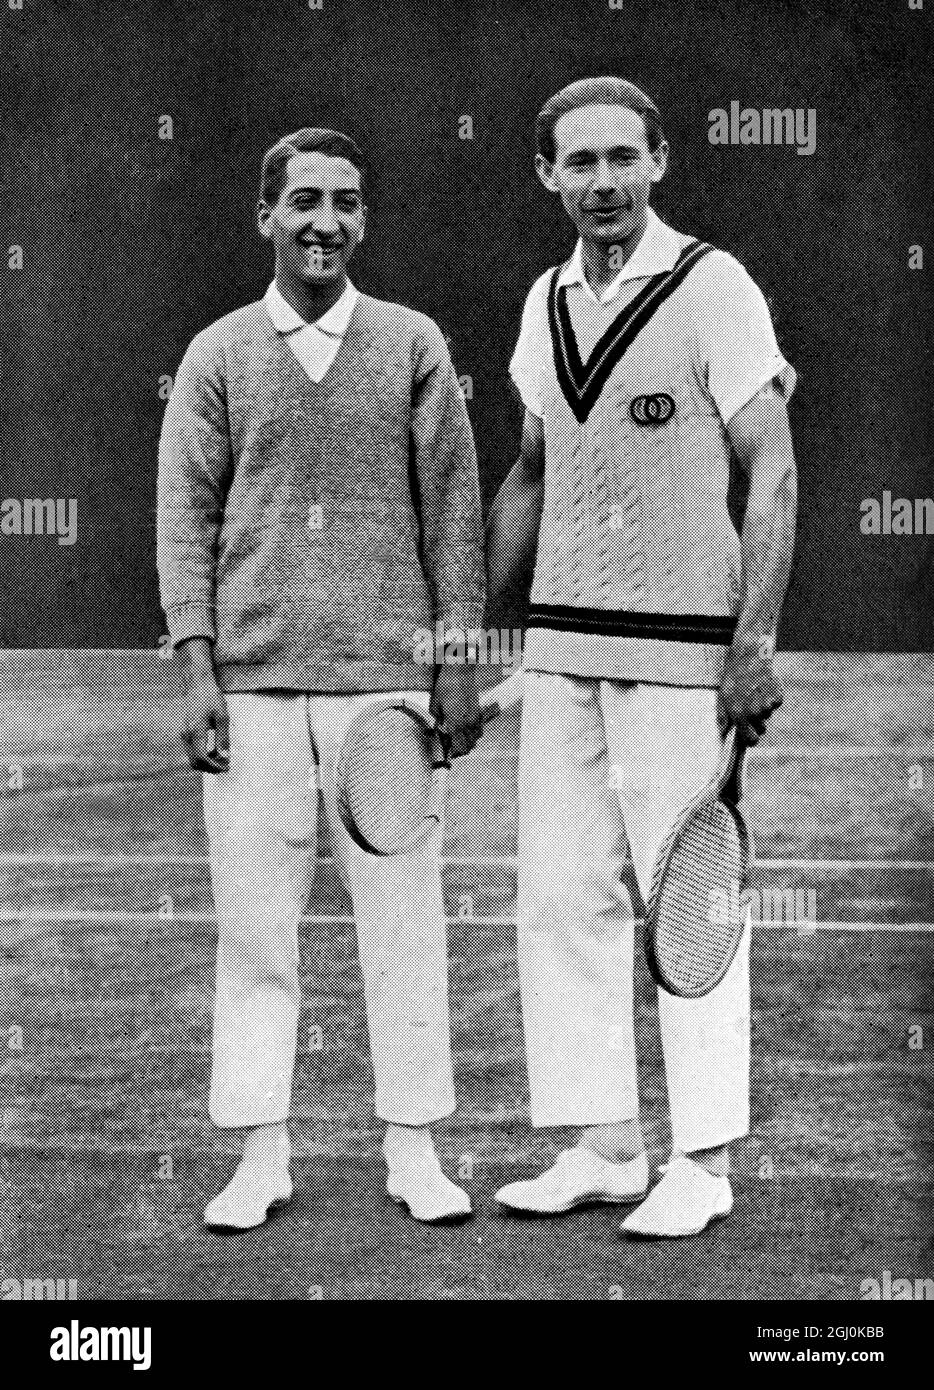 R. Lacoste and J. Borotra 1924 - all-French finalists. Jean René Lacoste  (July 2, 1904 - October 12, 1996) was a famous French tennis player and  businessman, nicknamed ""the Crocodile"" or ""the